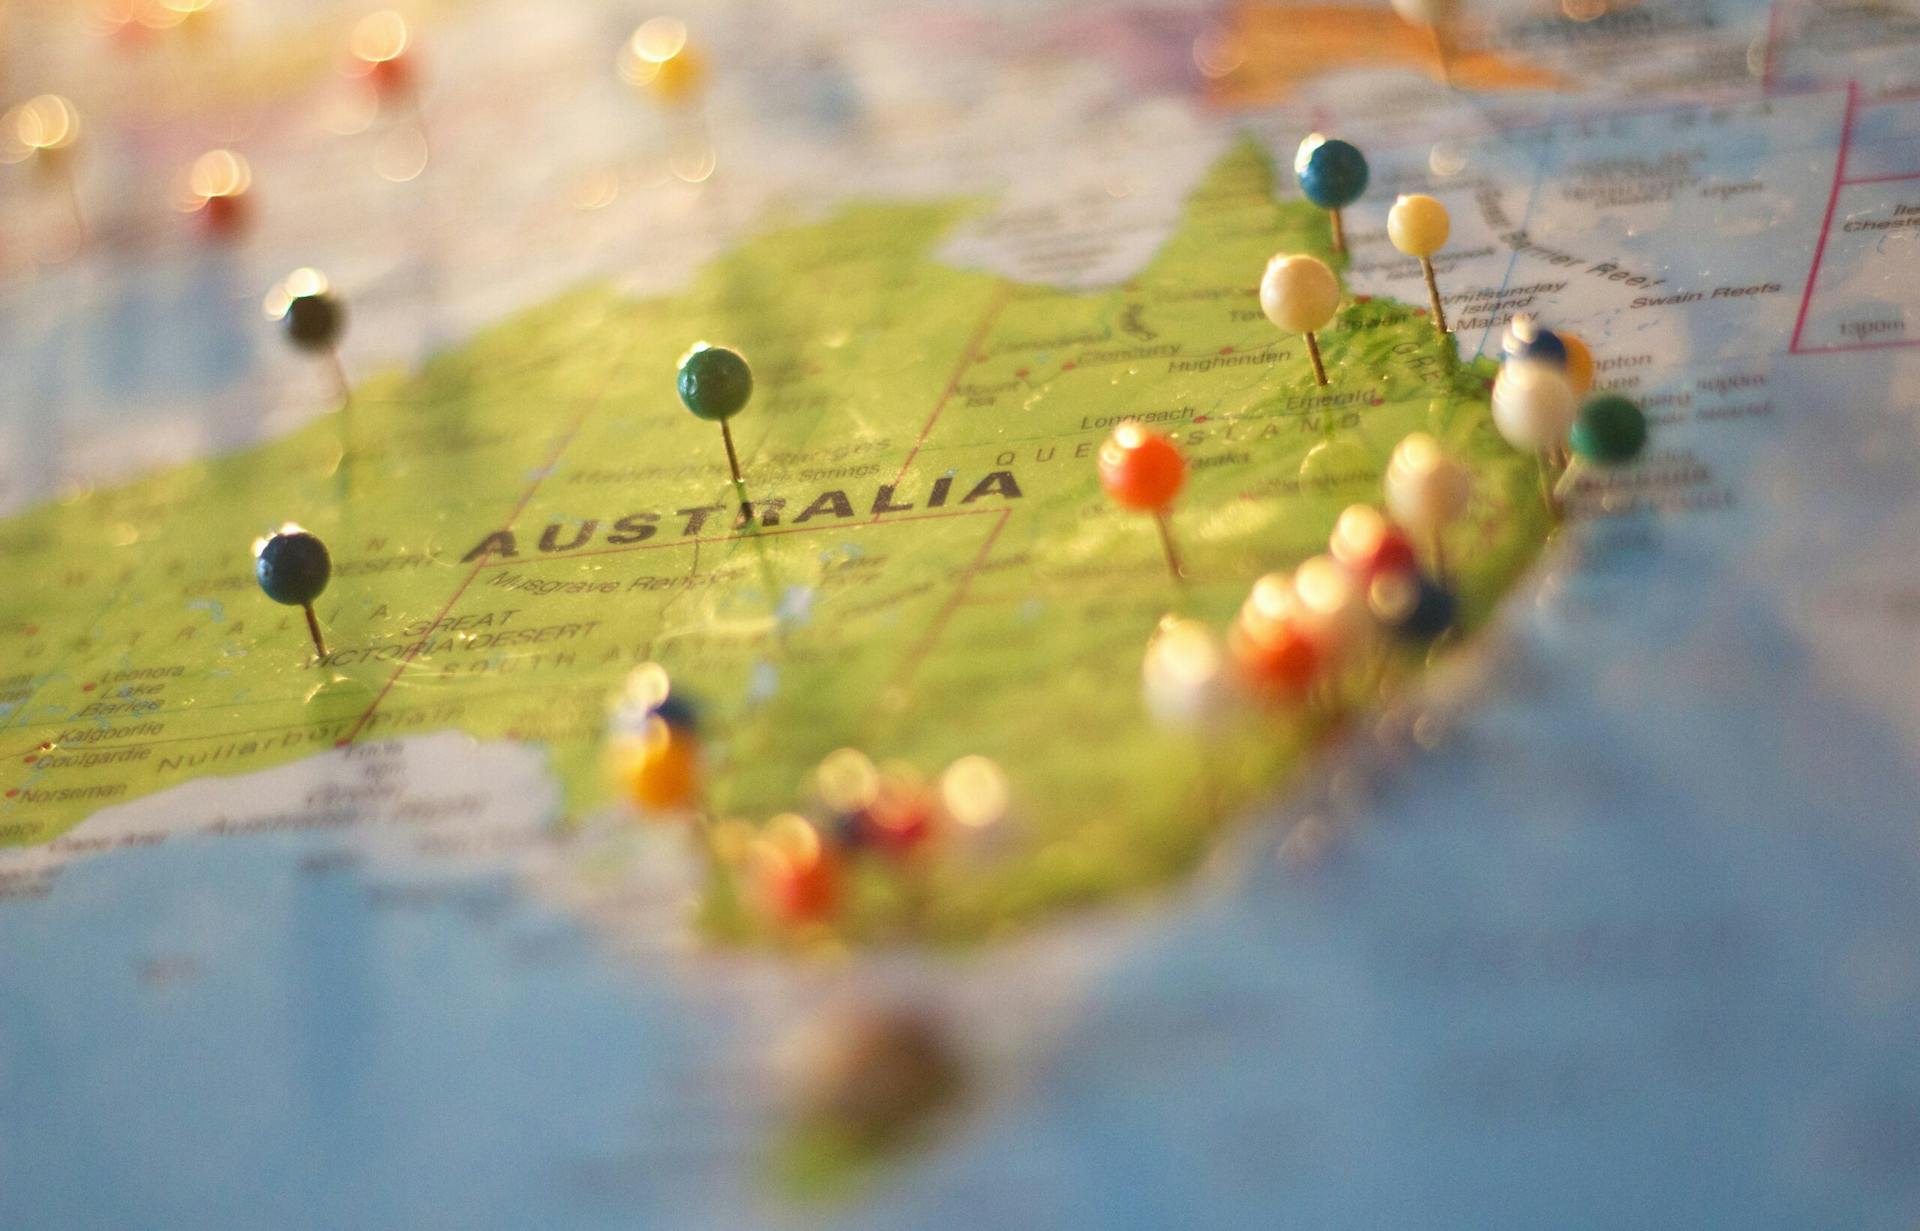 Image Showing a Map Zoomed in on Australia with Pins on it